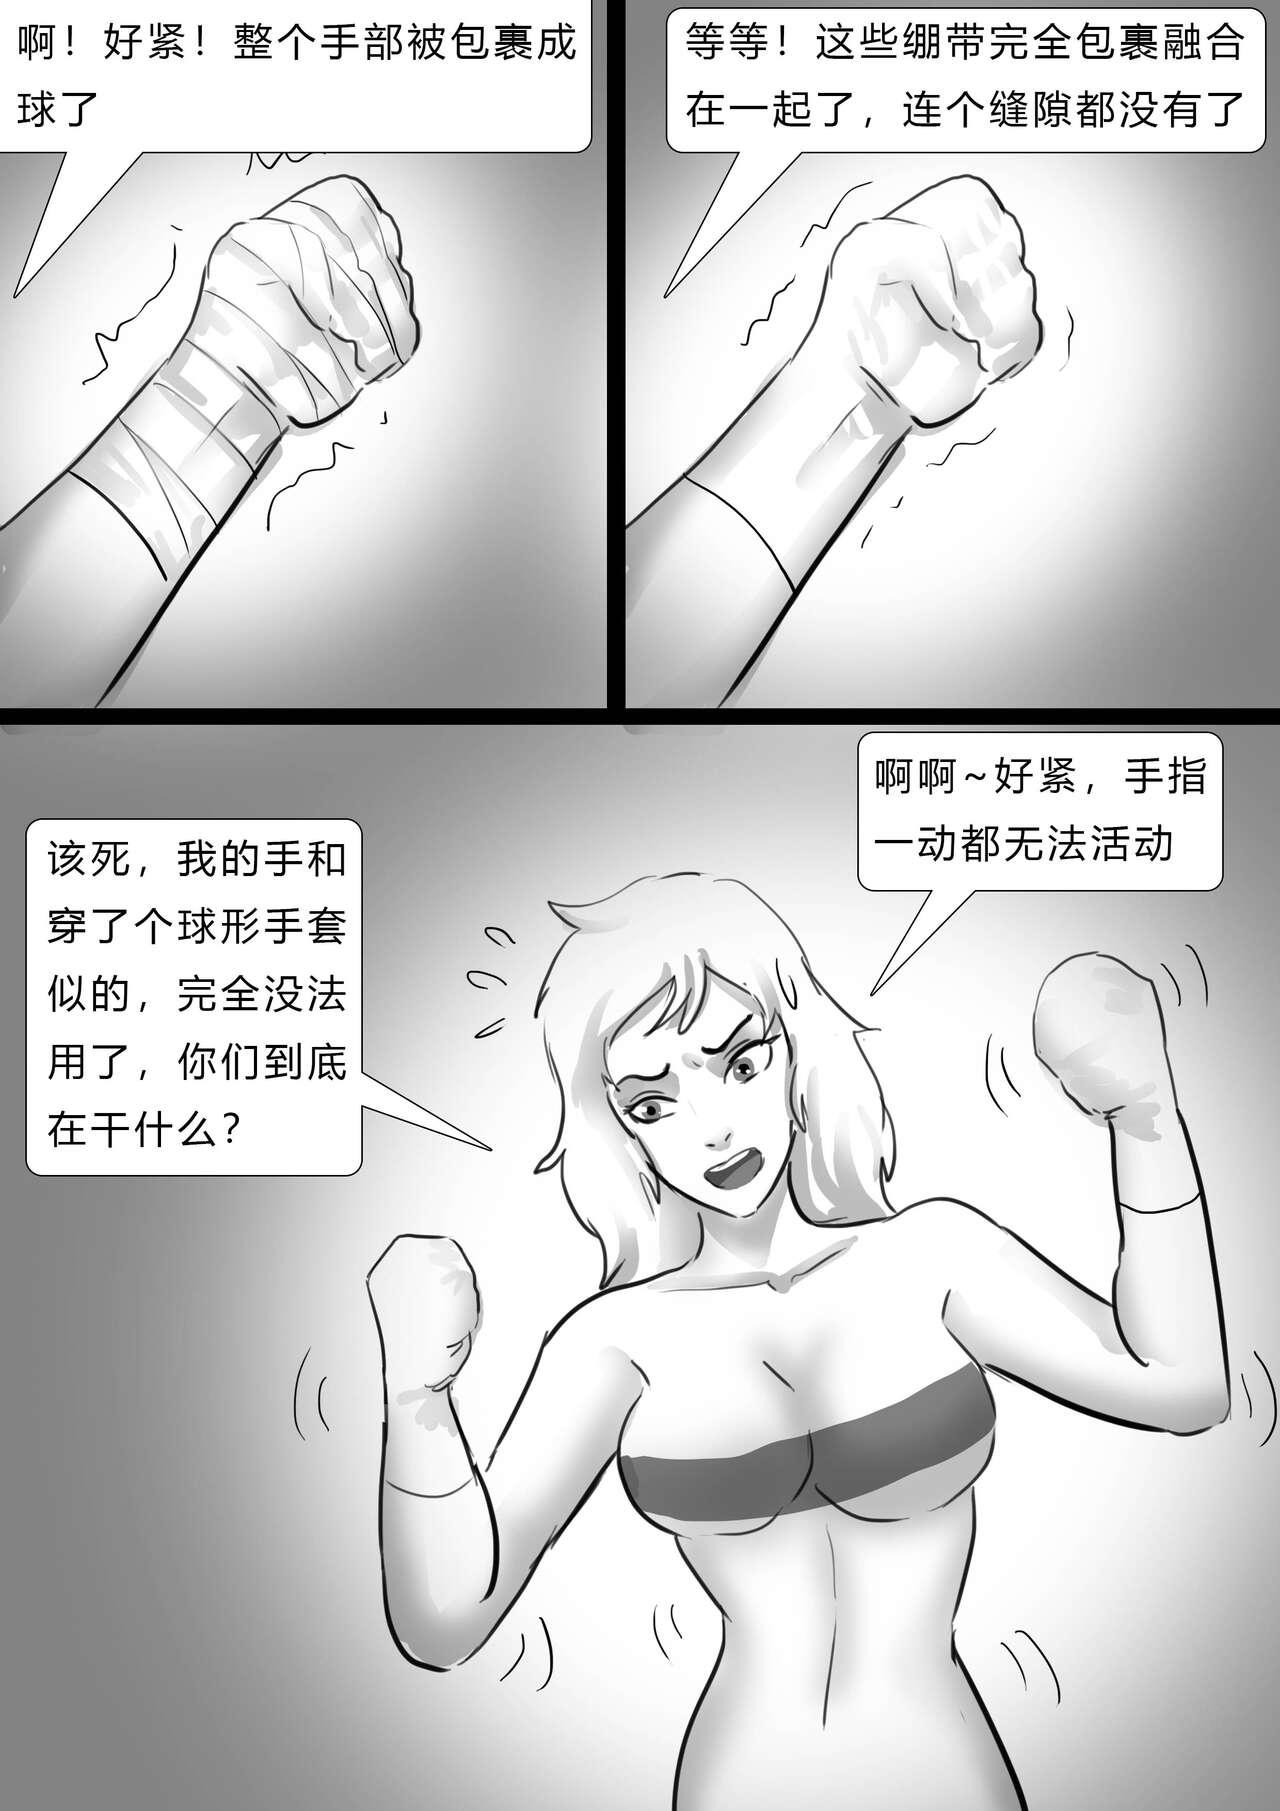 Style 千变女奴 Thousand-change slave girl Audition - Page 6